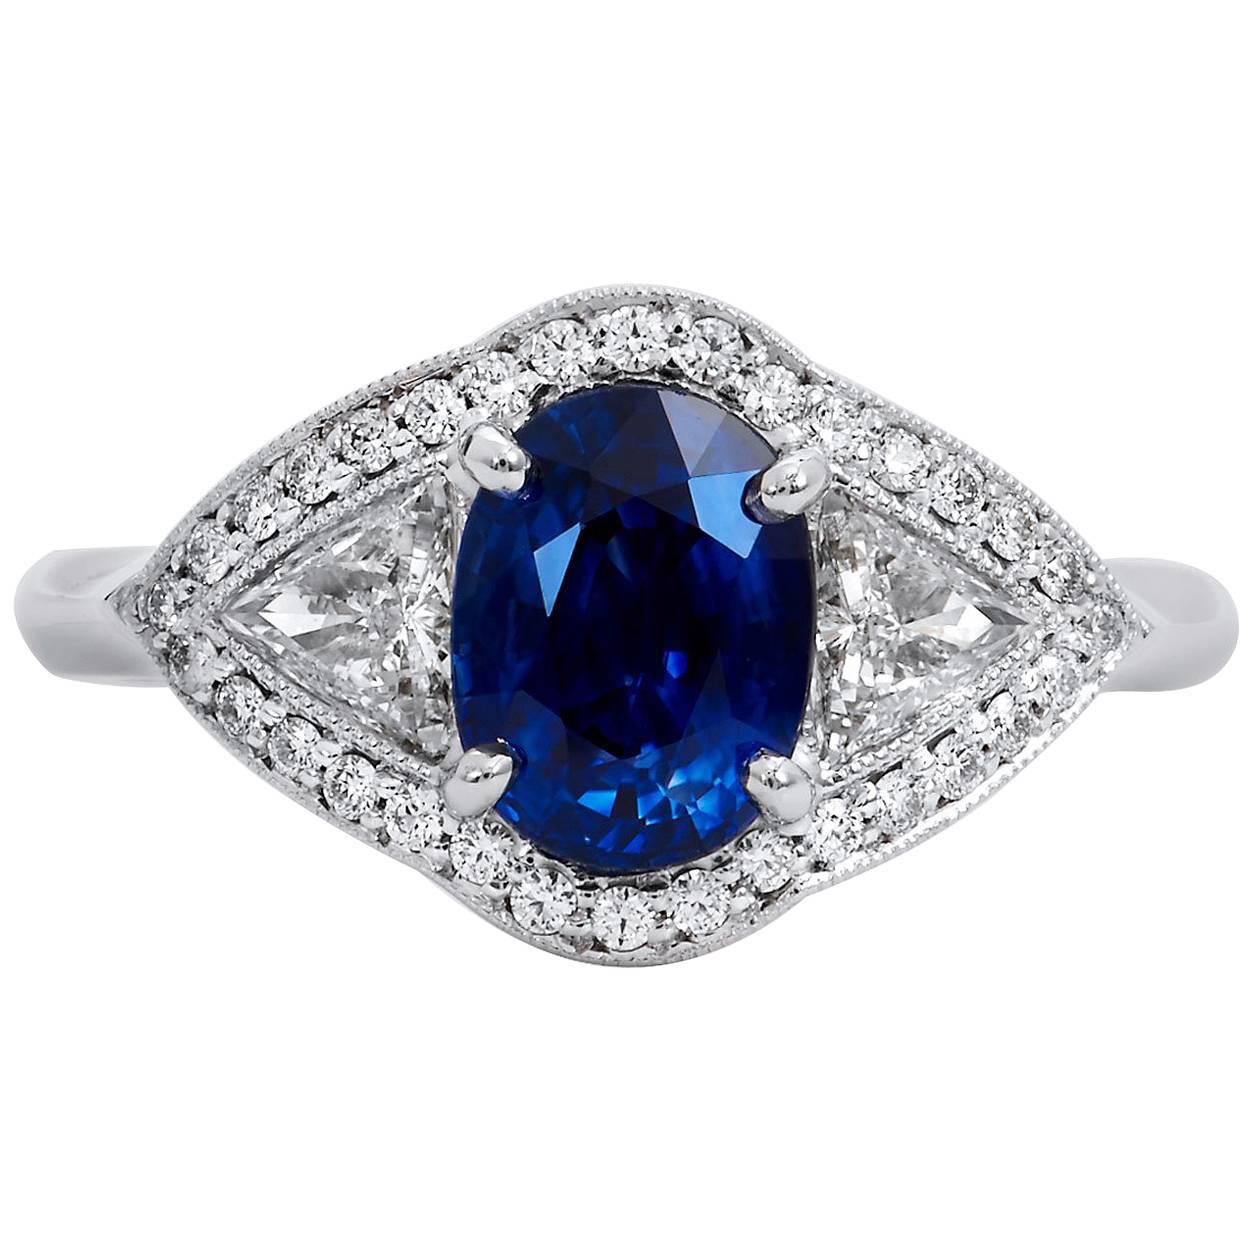 H & H 1.50 Carat Oval Royal Blue Sapphire and Trillion Cut Diamond Cocktail Ring